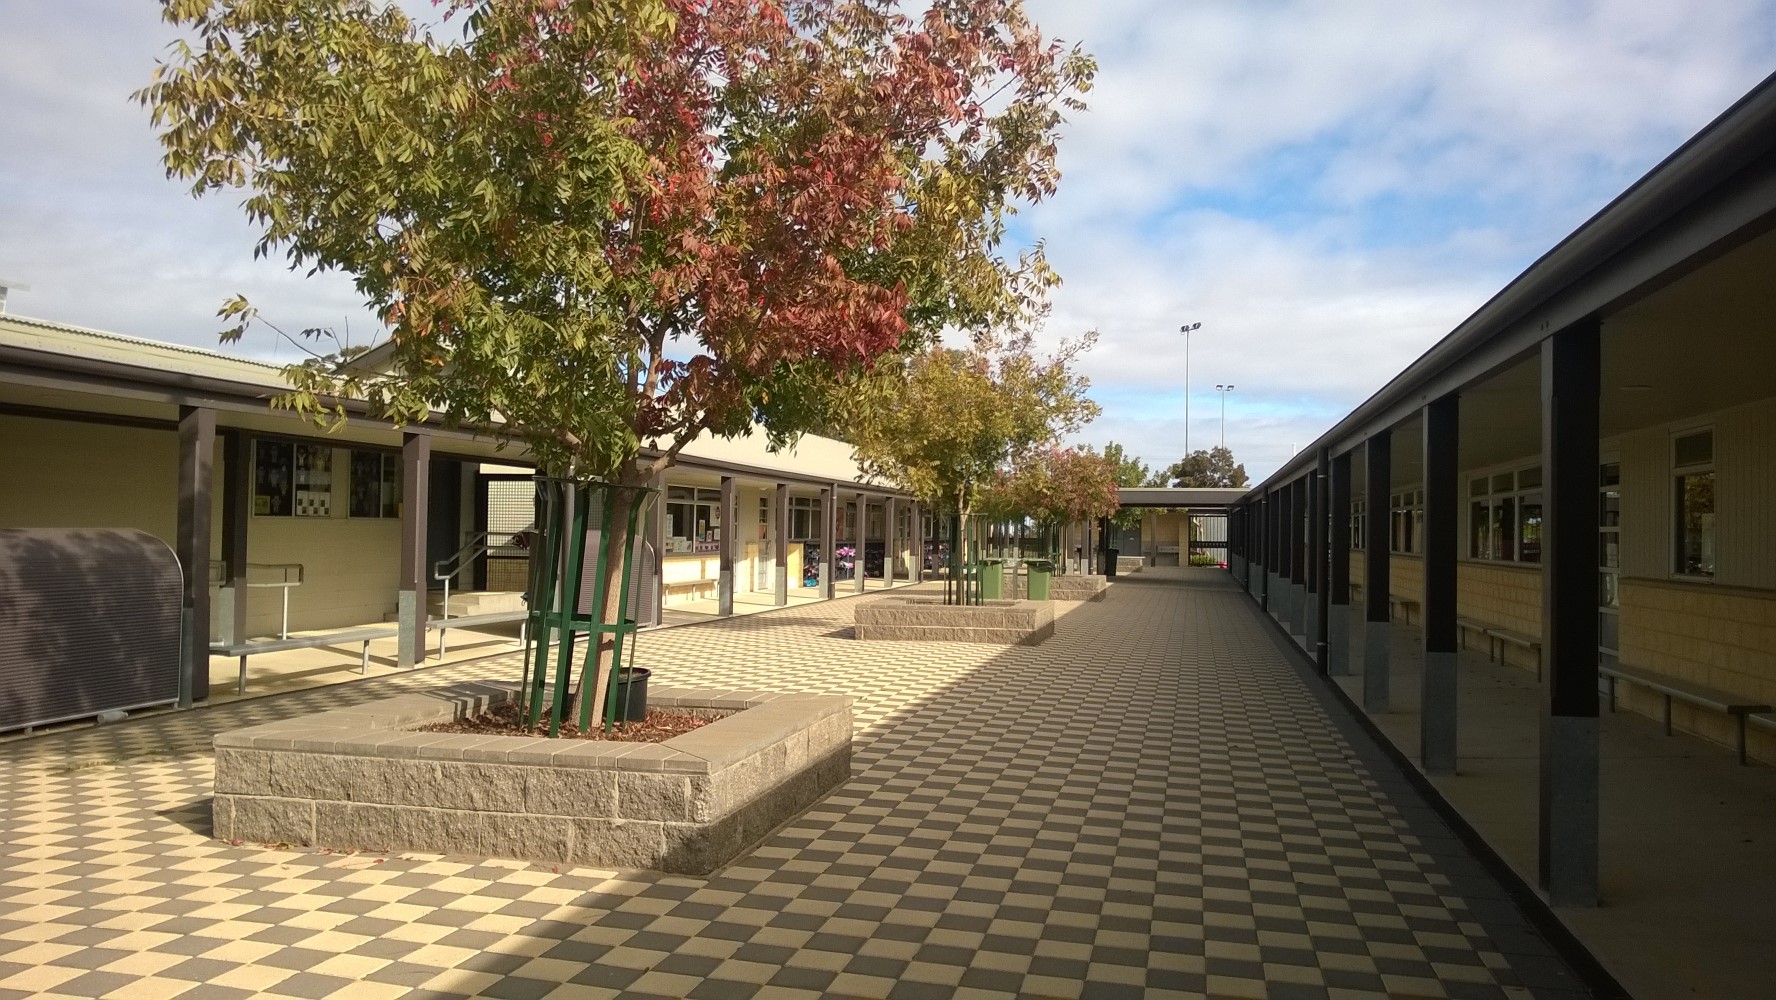 Photograph of the central courtyard in early autumn